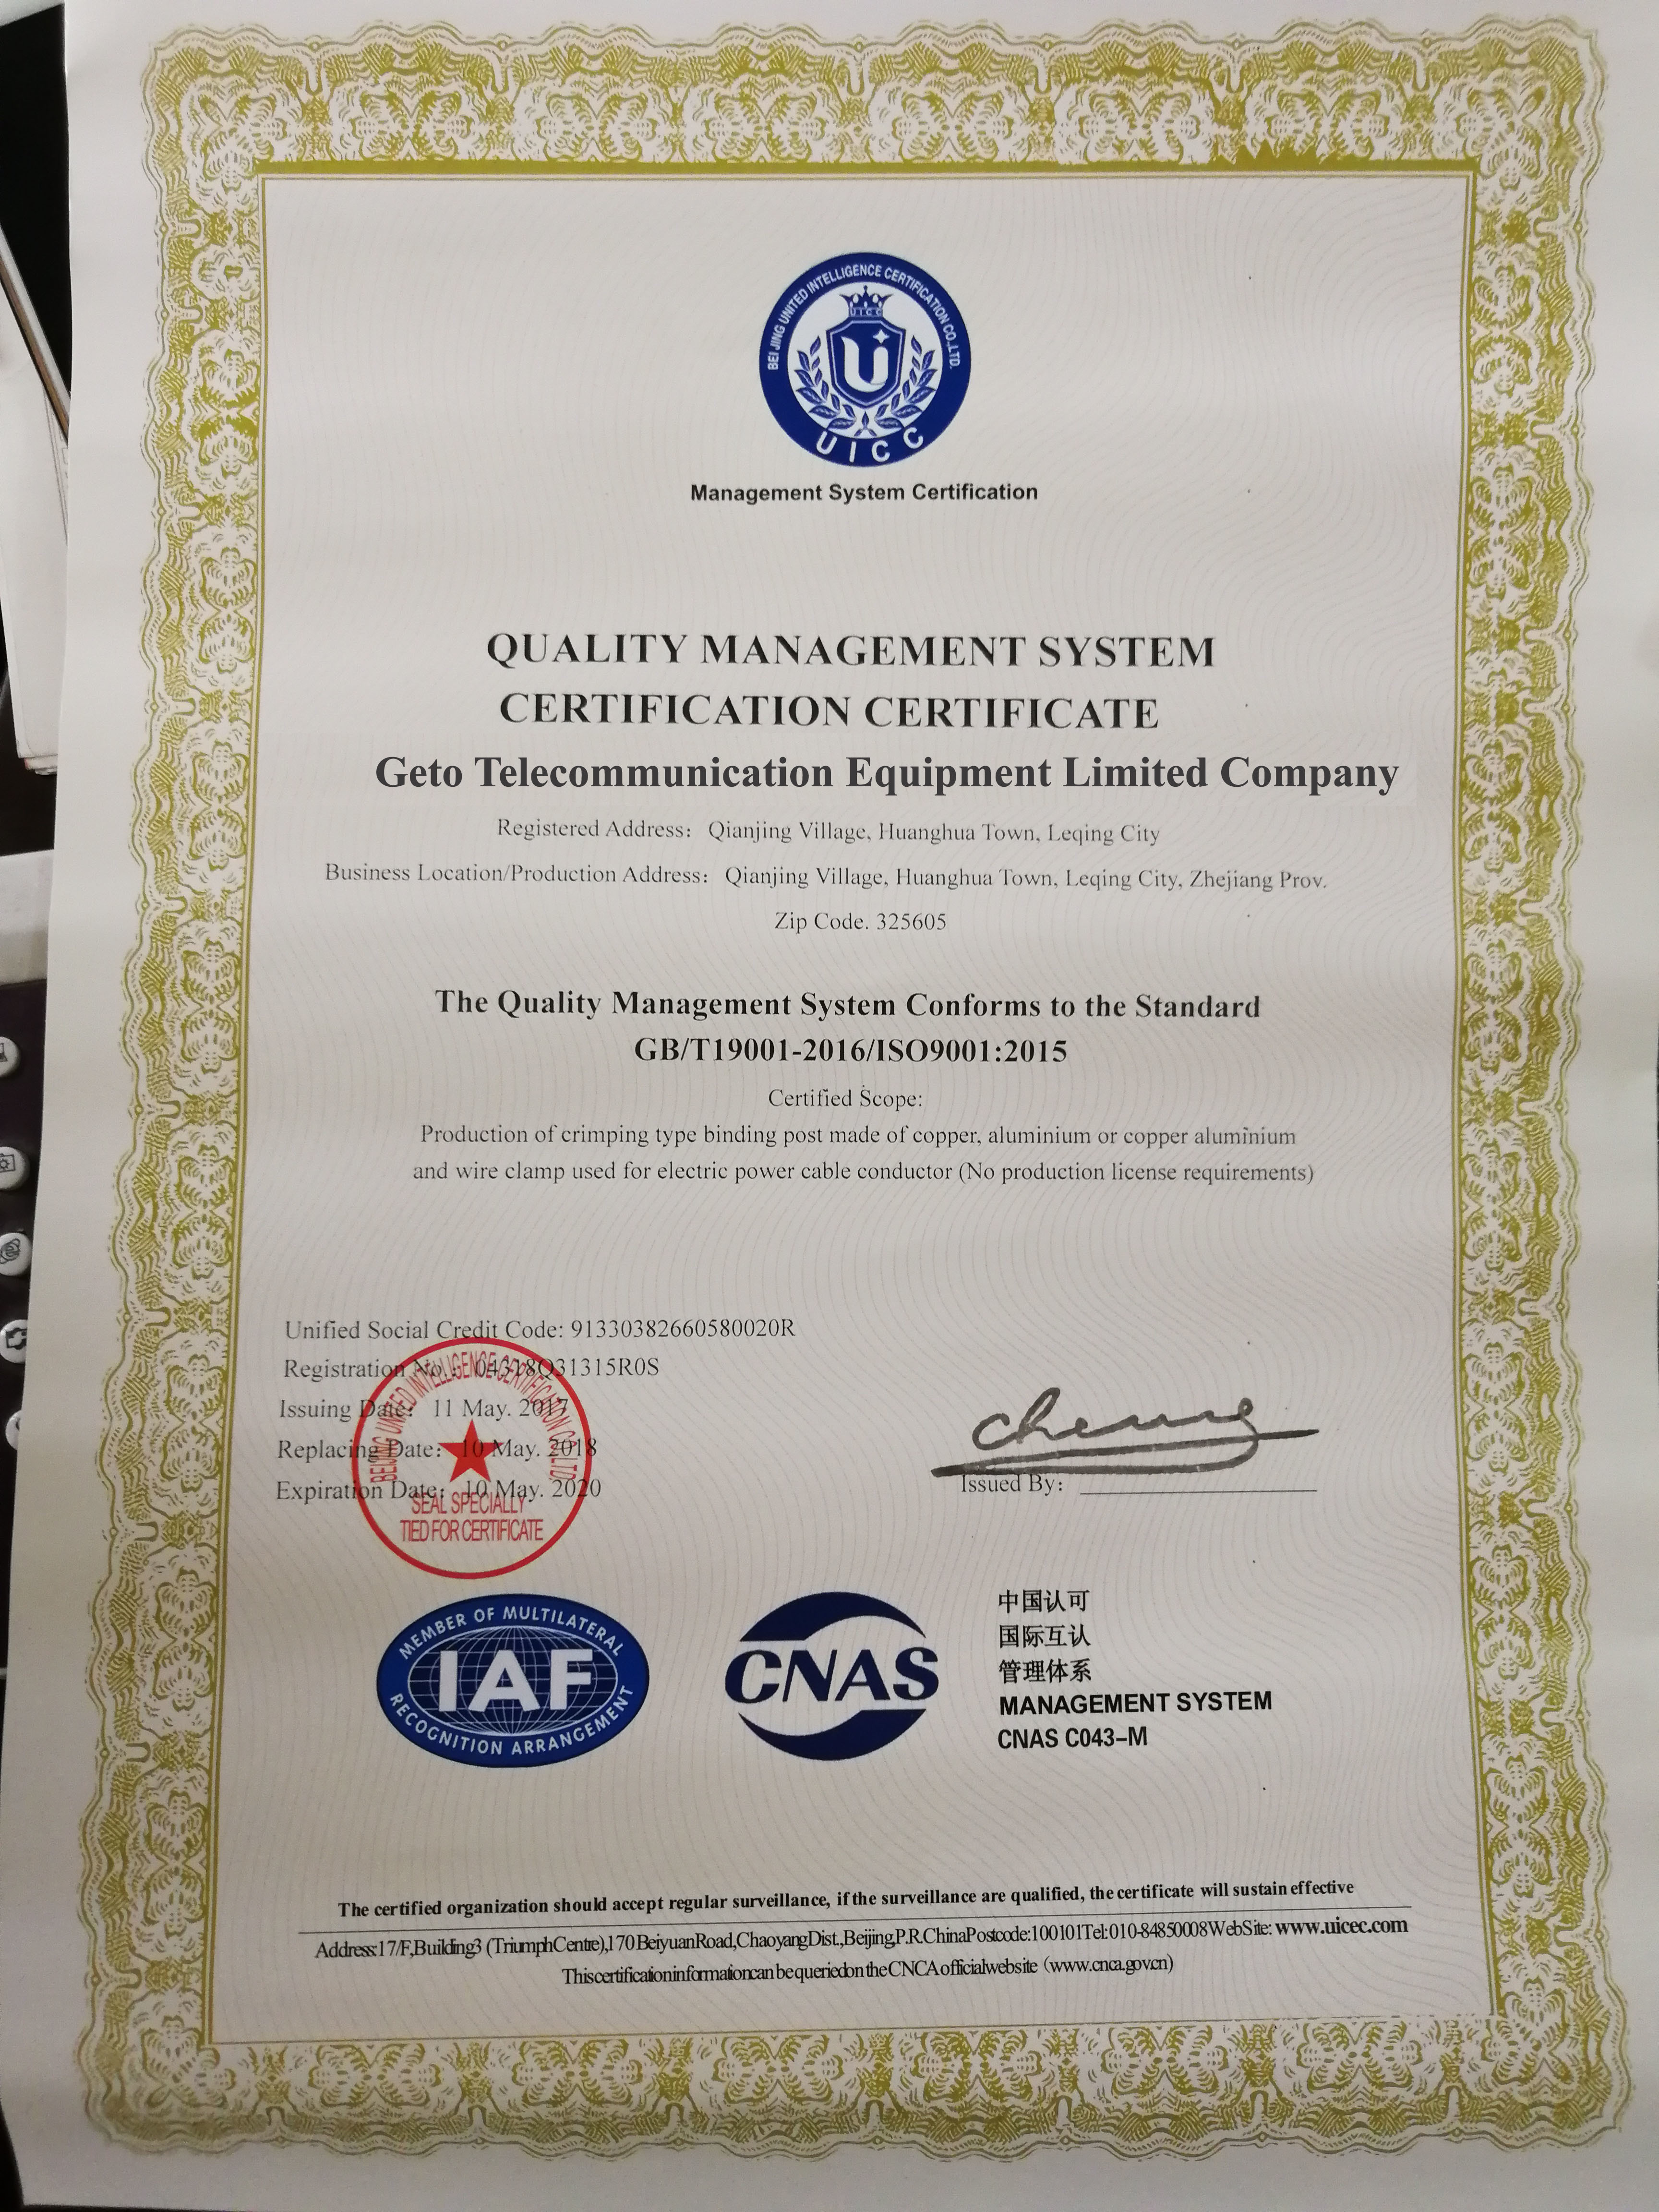 Geto telecommunication equipment limited company Certifications